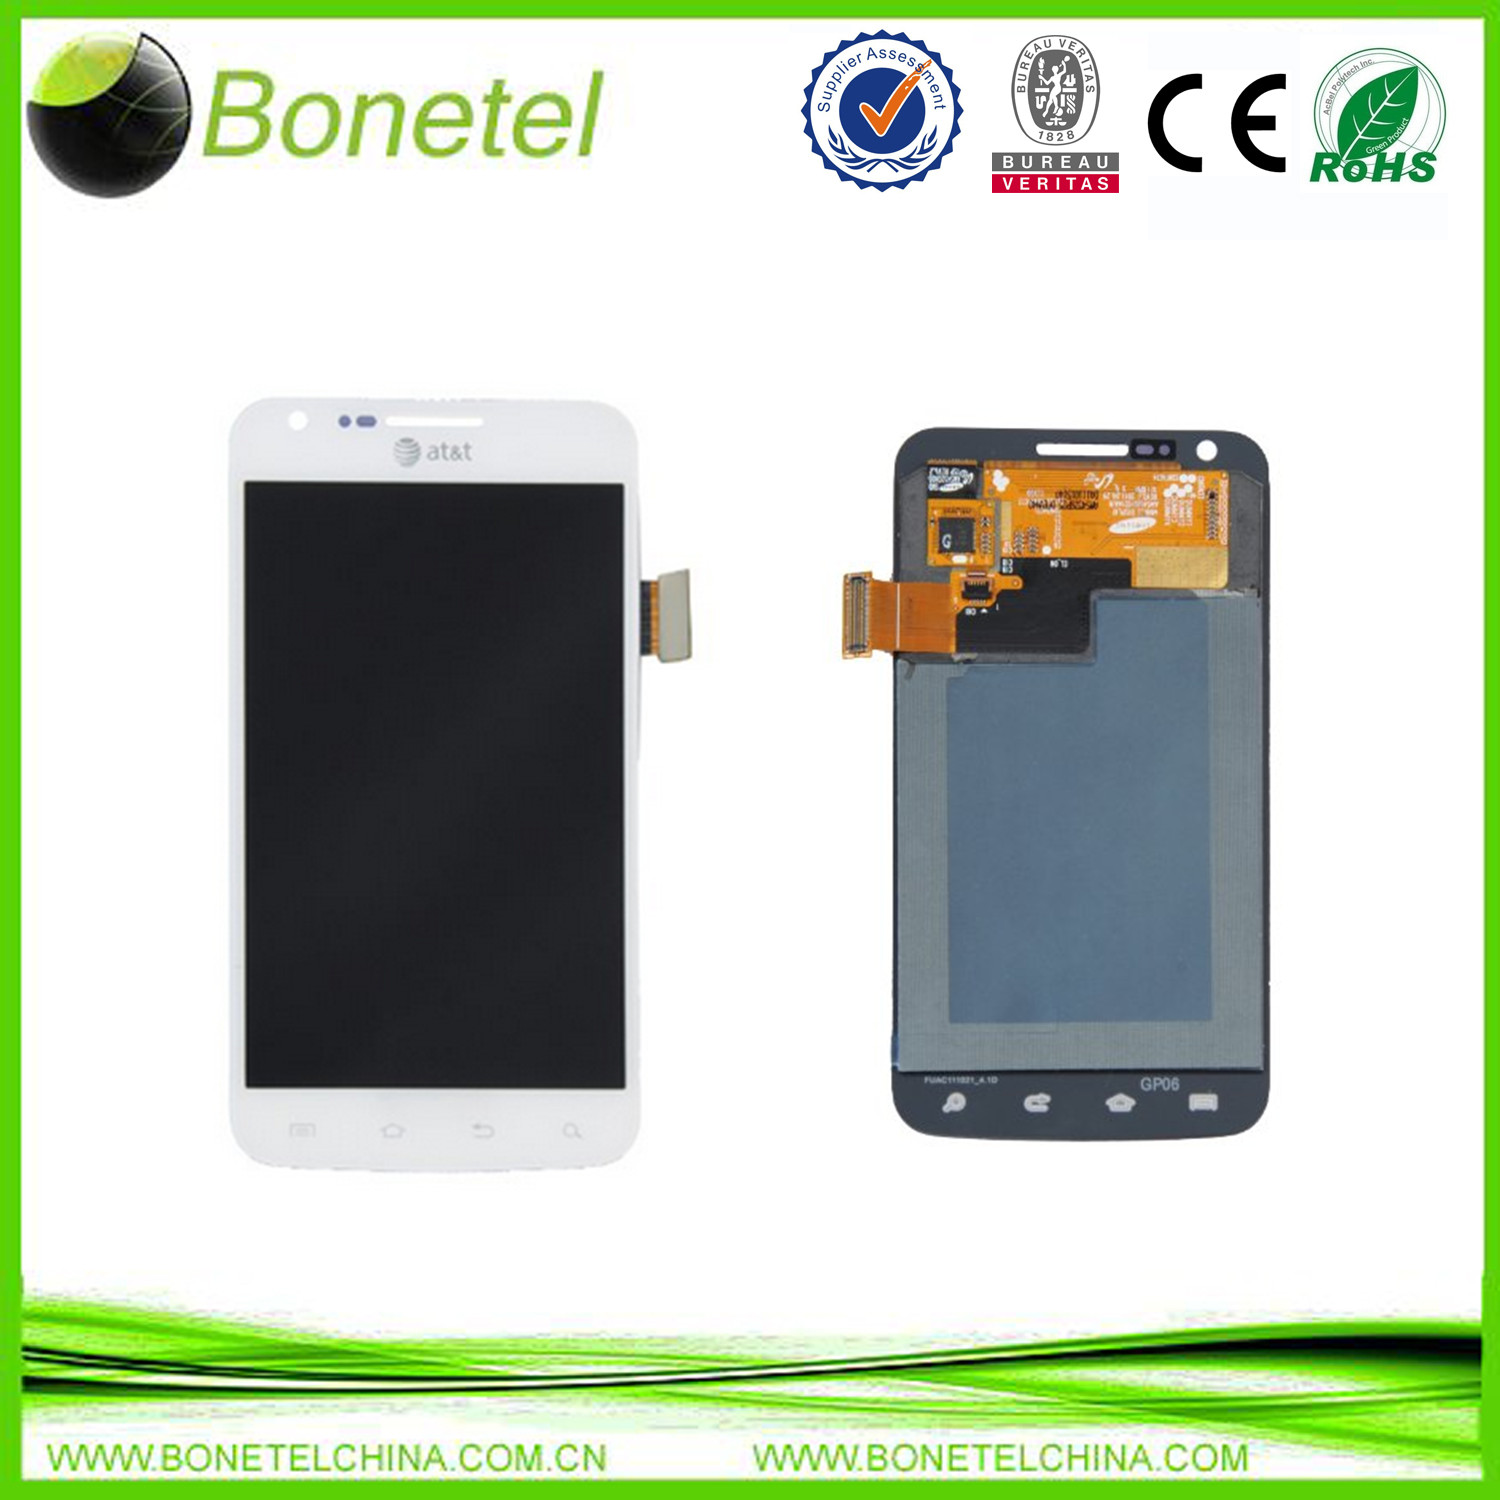 LCD Display Touch Screen Digitizer Assembly For Samsung Galaxy S2 Skyrocket i727 at&t White Grade B+